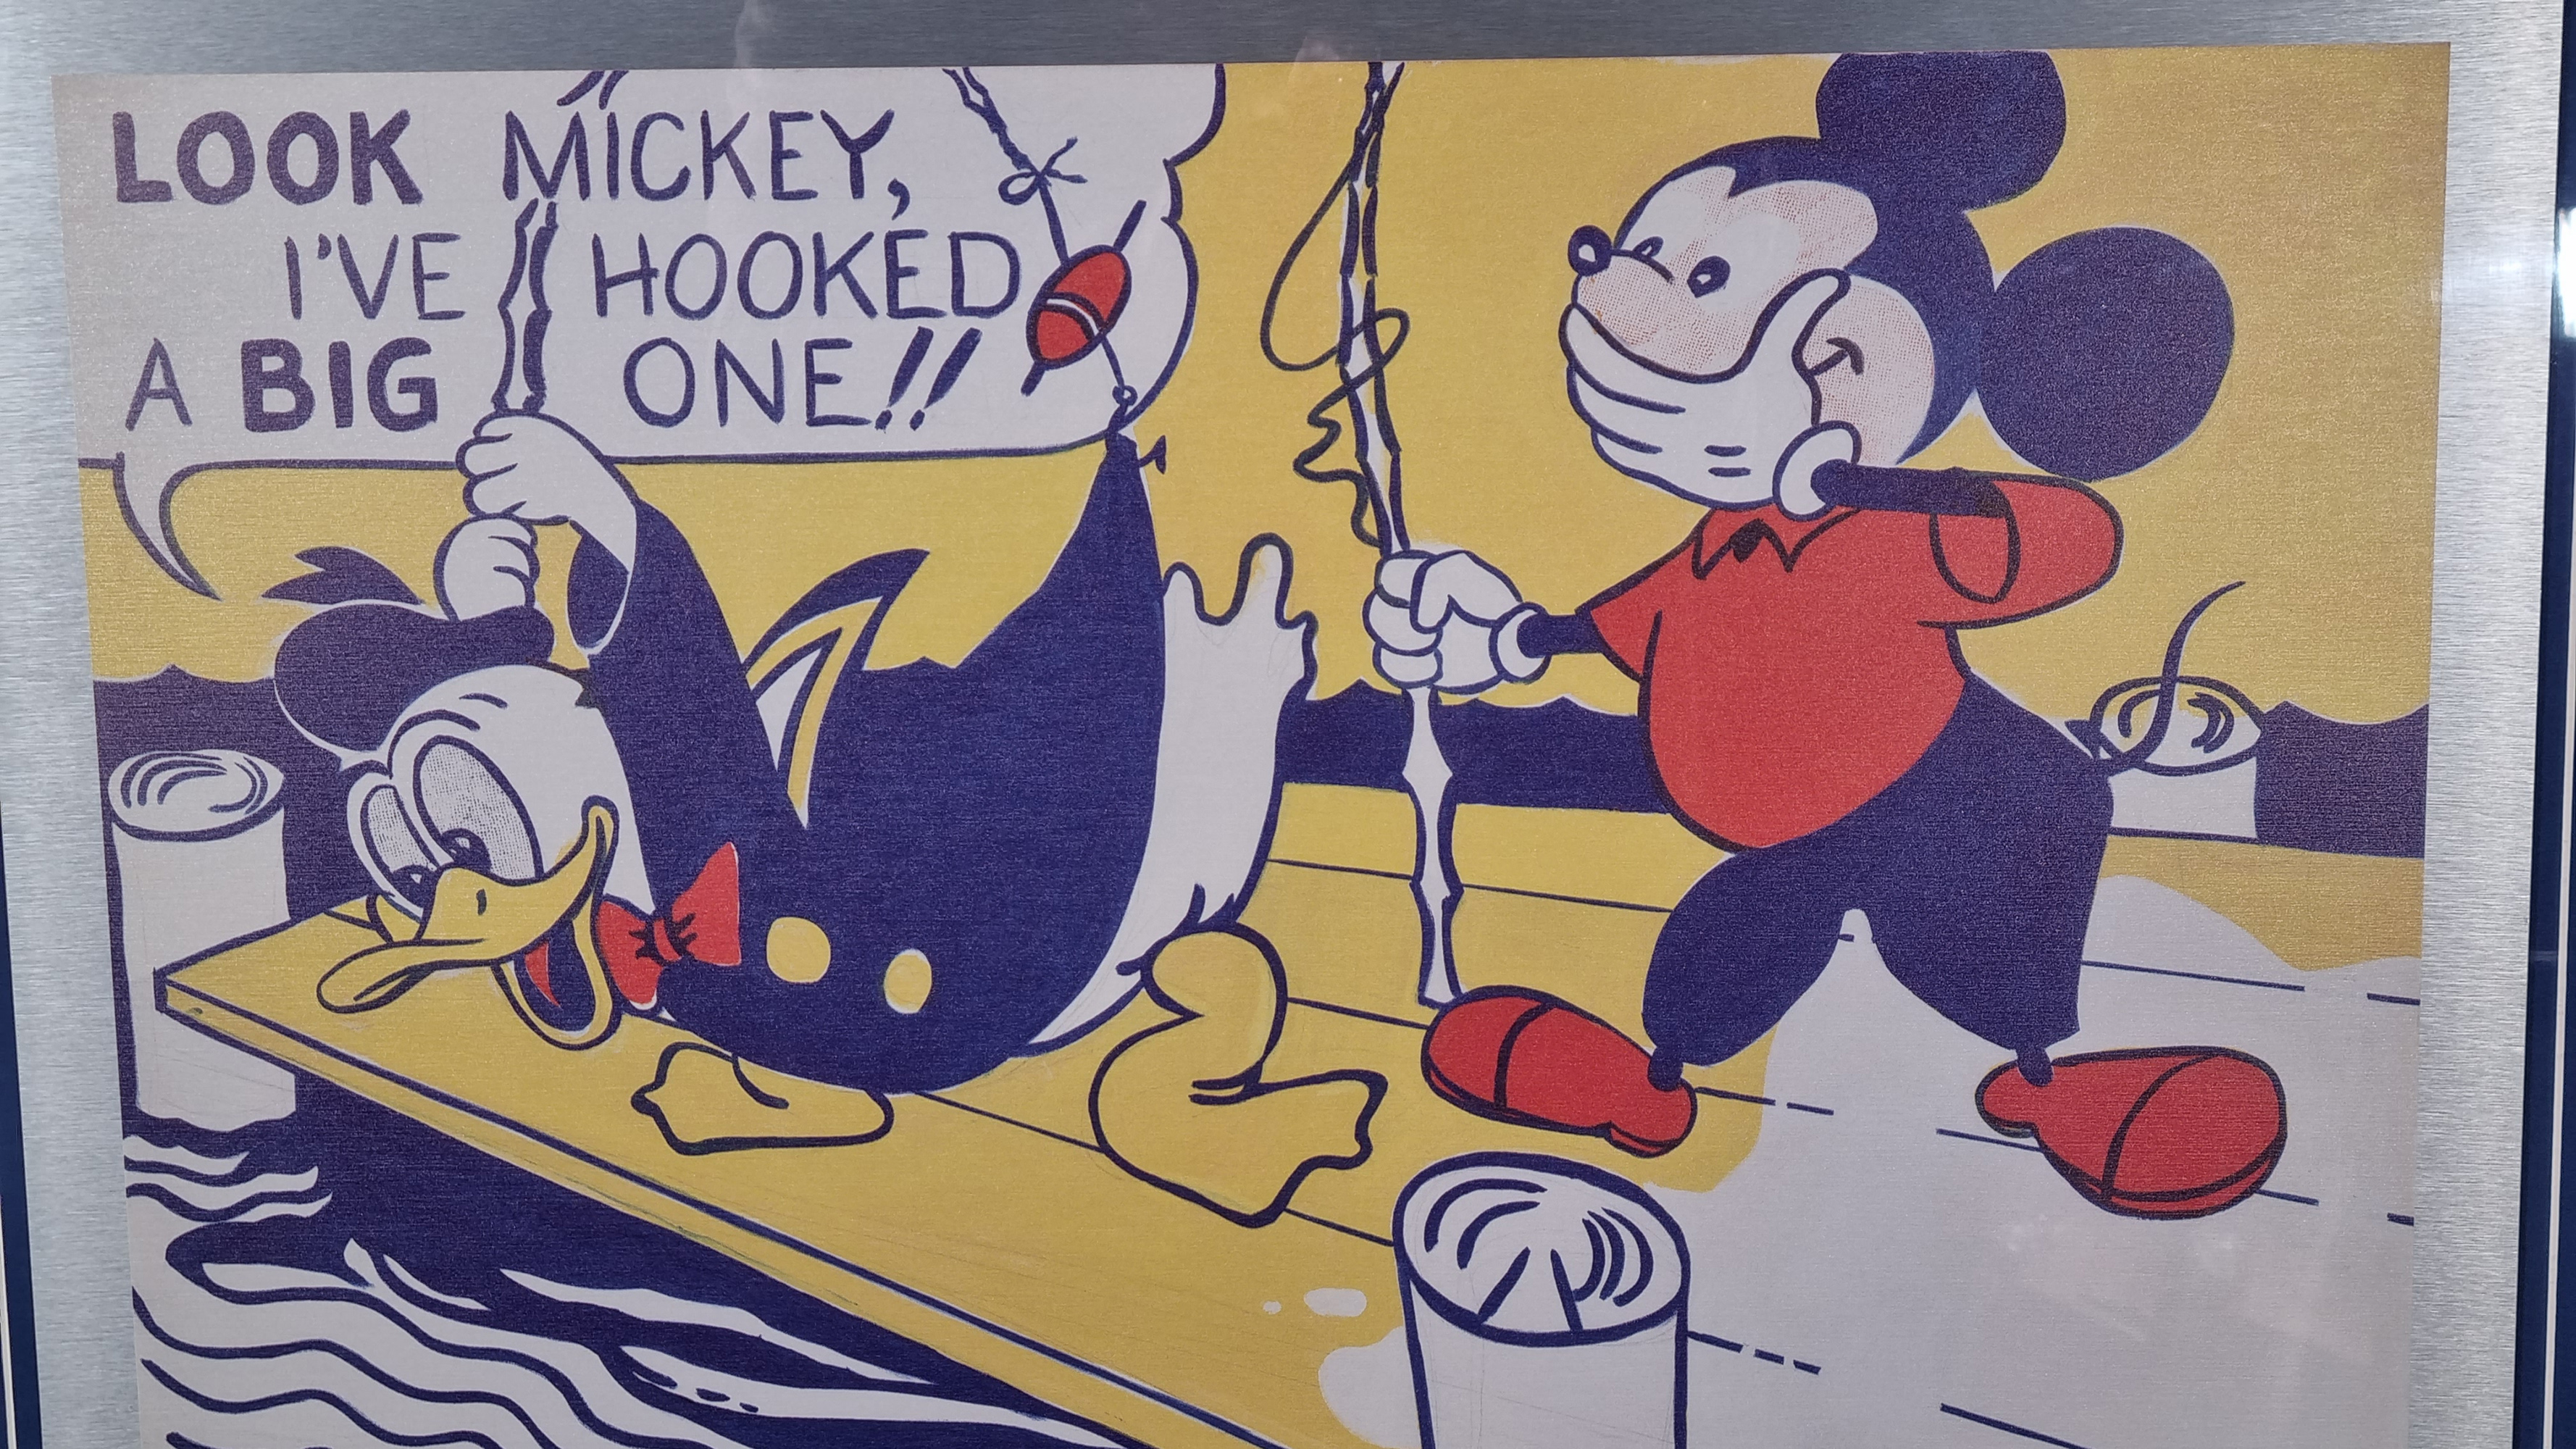 Rare Roy Lichtenstein "Look Mickey, 1961" Limited Edition on Metal. - Image 9 of 9